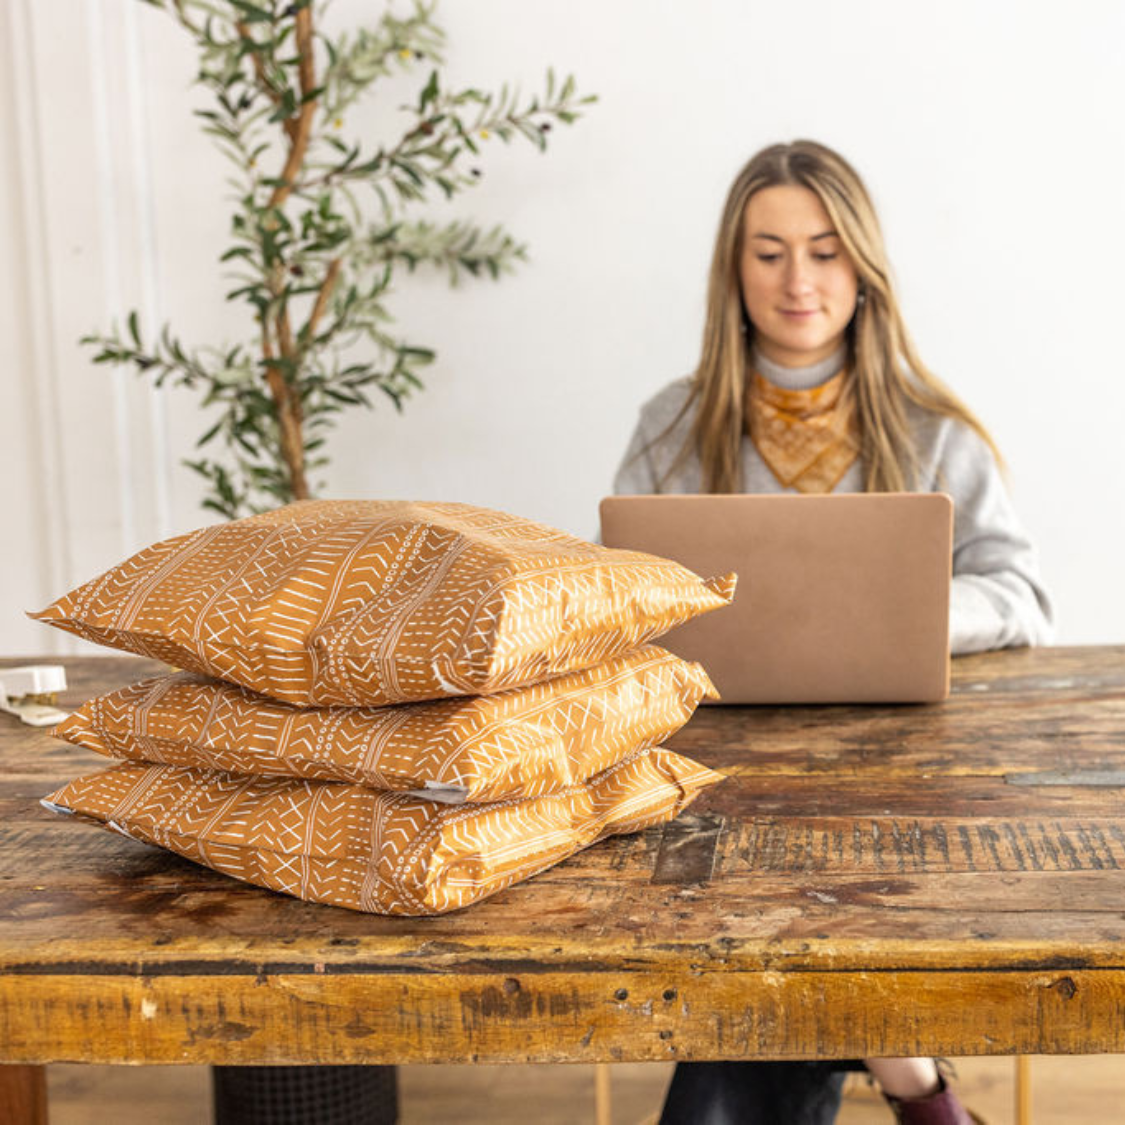 Woman processing small business orders on a laptop with a stack of Favorite Supplies' Boho Brown Poly Mailers on the table. Streamlining shipping for efficient and stylish packaging.